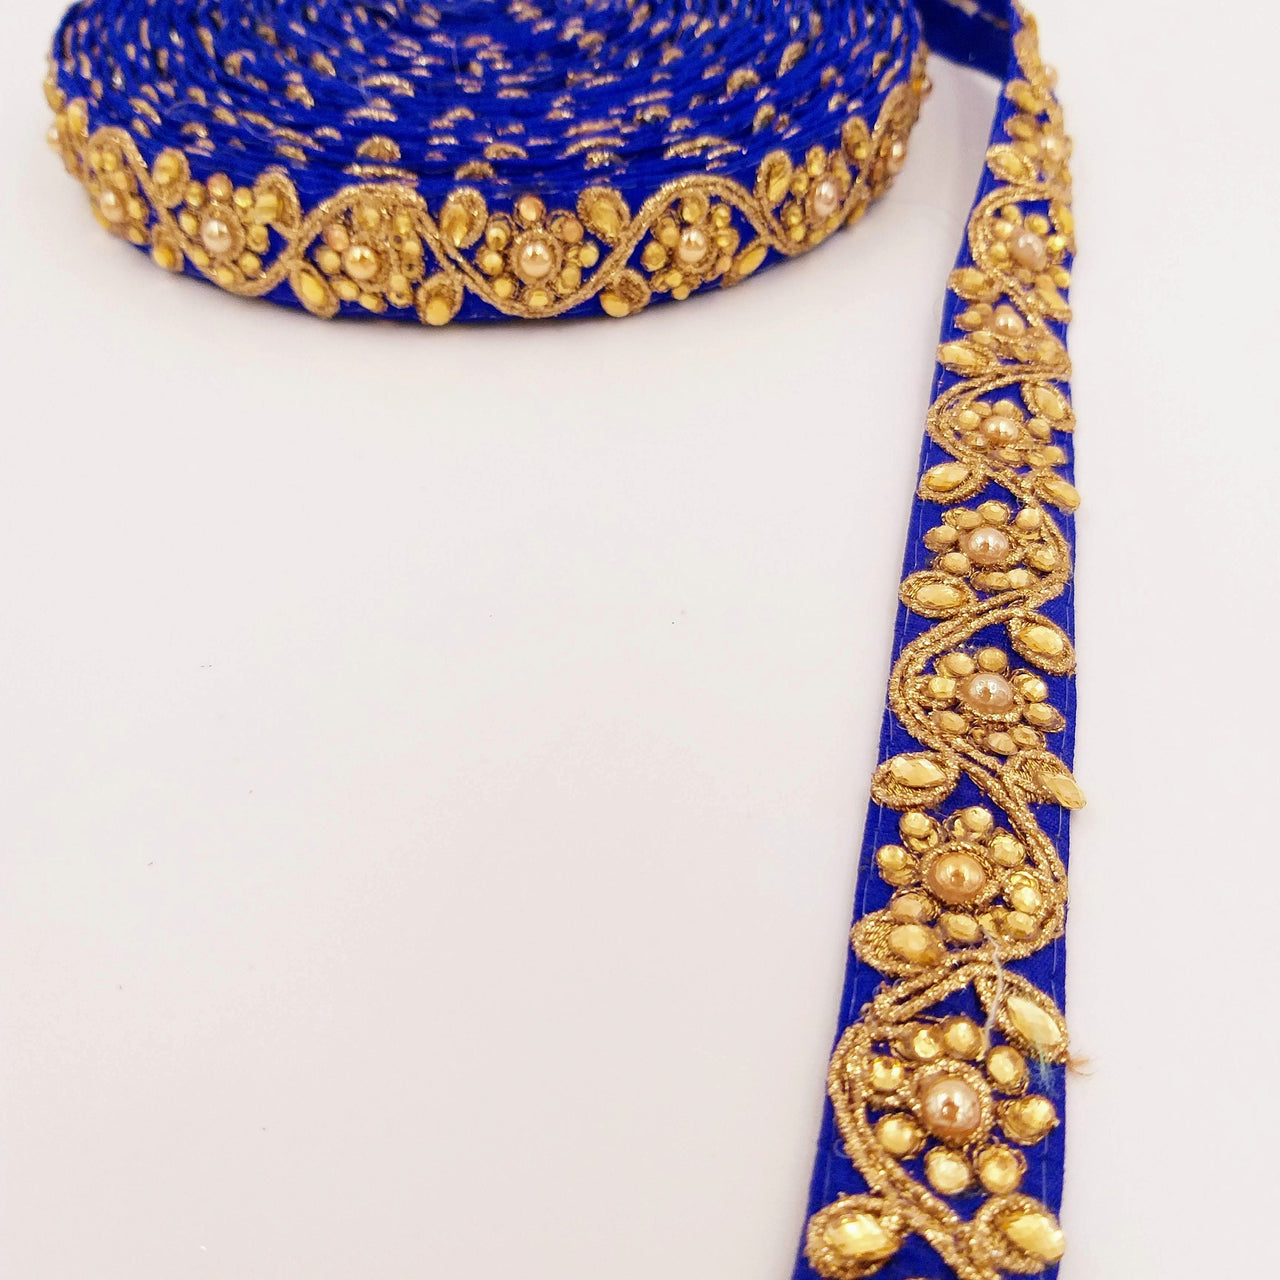 Indian Embroidered Ribbon Trimming or Shalwar Kameeze Border; Floral  Traditional embroidery design with a metallic copper thread detail . A  Original